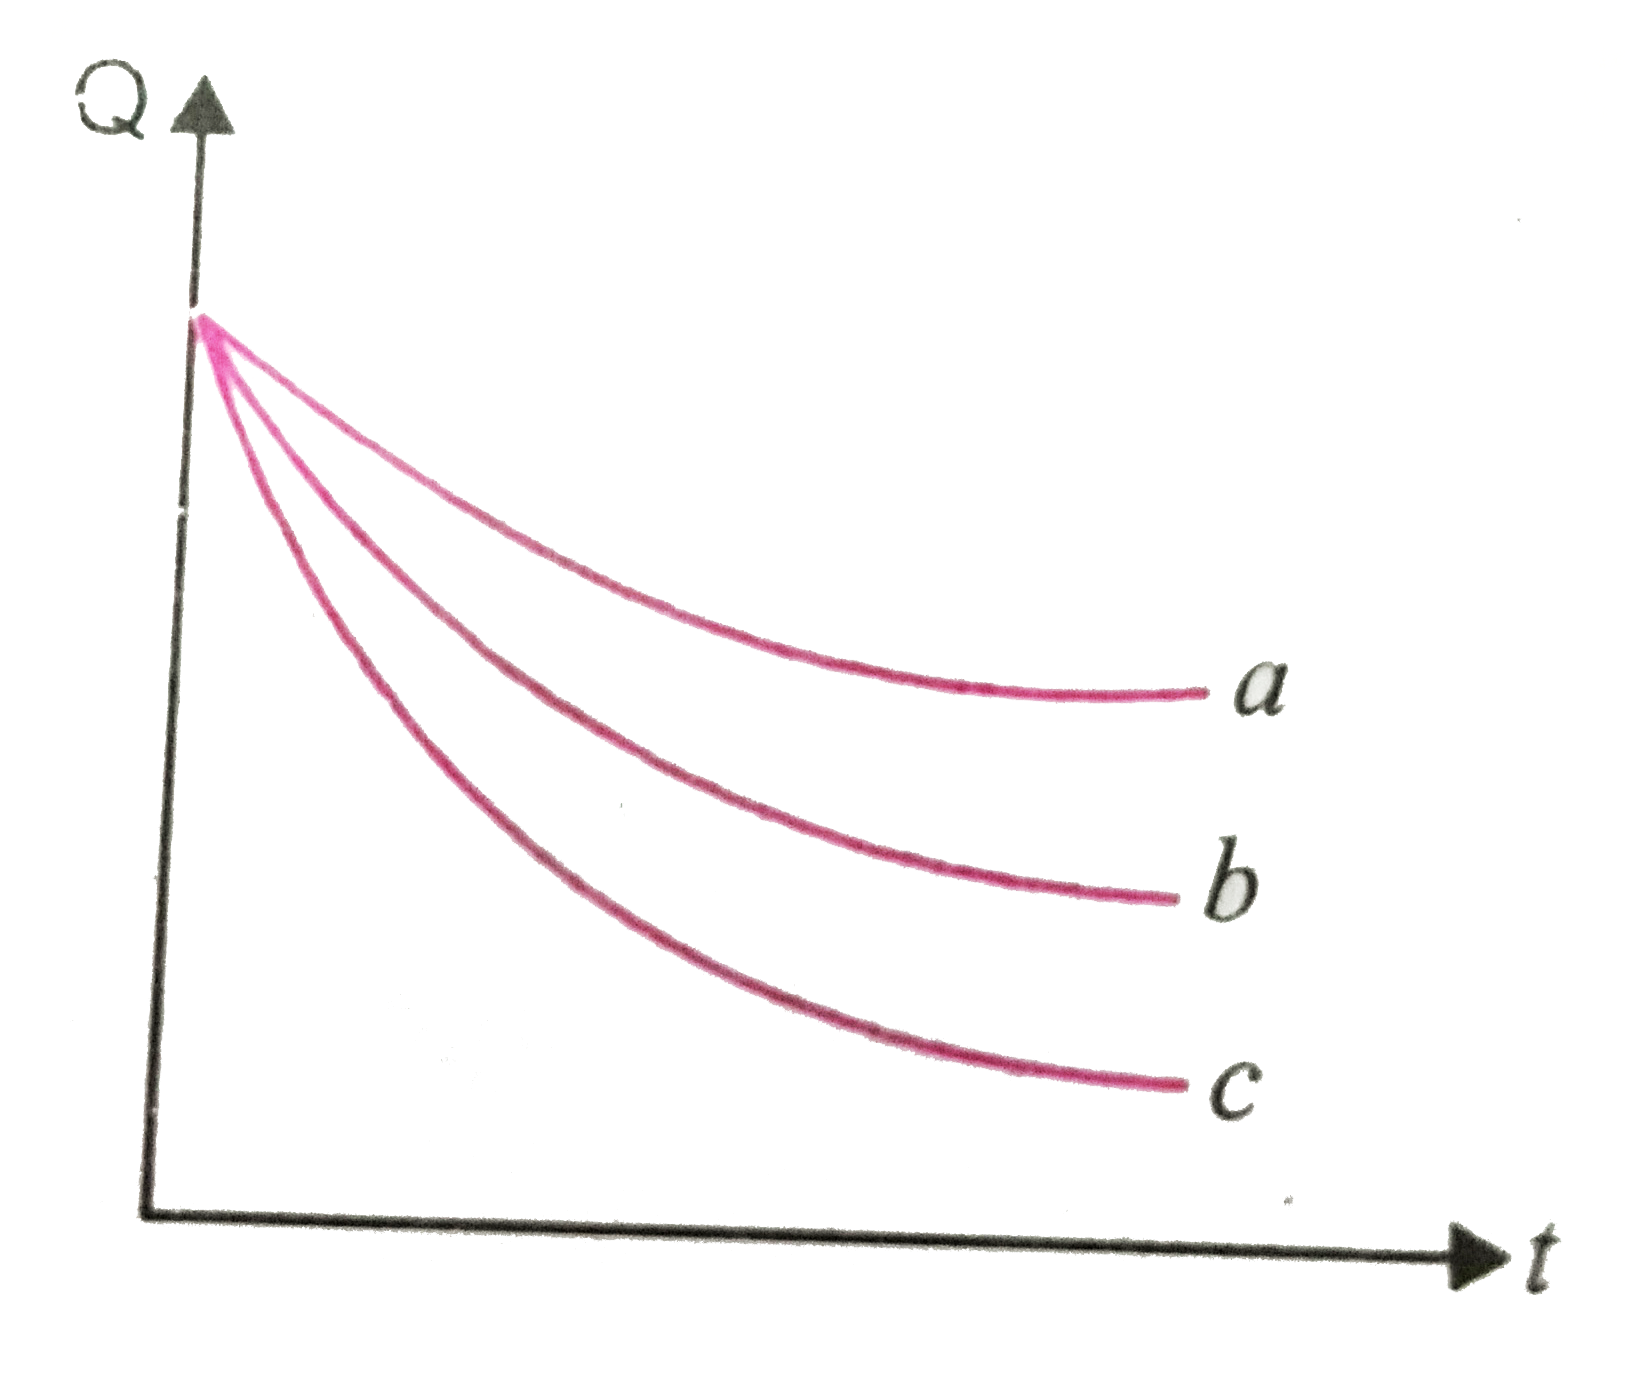 Cooling curves are drawn for three liquids a,b,c, shown in fig. for which liquid specific heat is least?